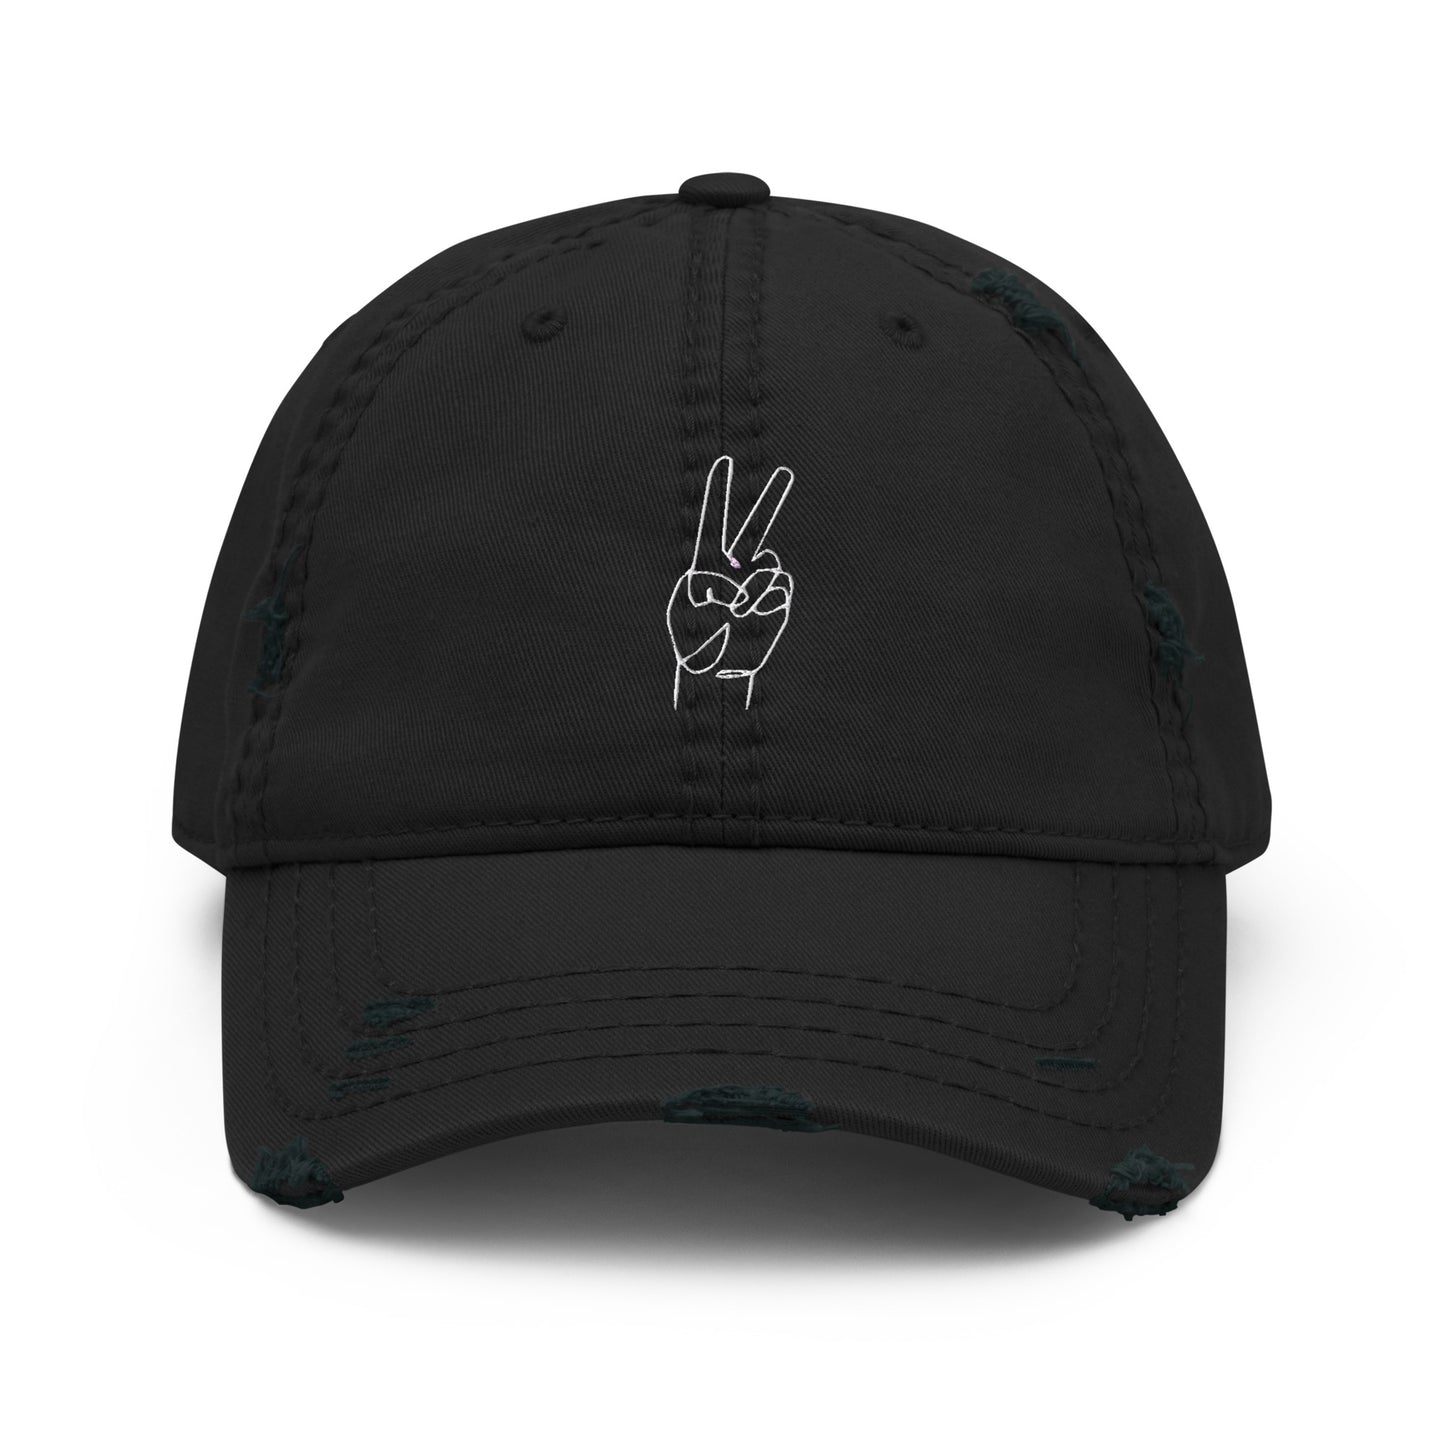 MANIFEST PEACE Embroidered Distressed Hat